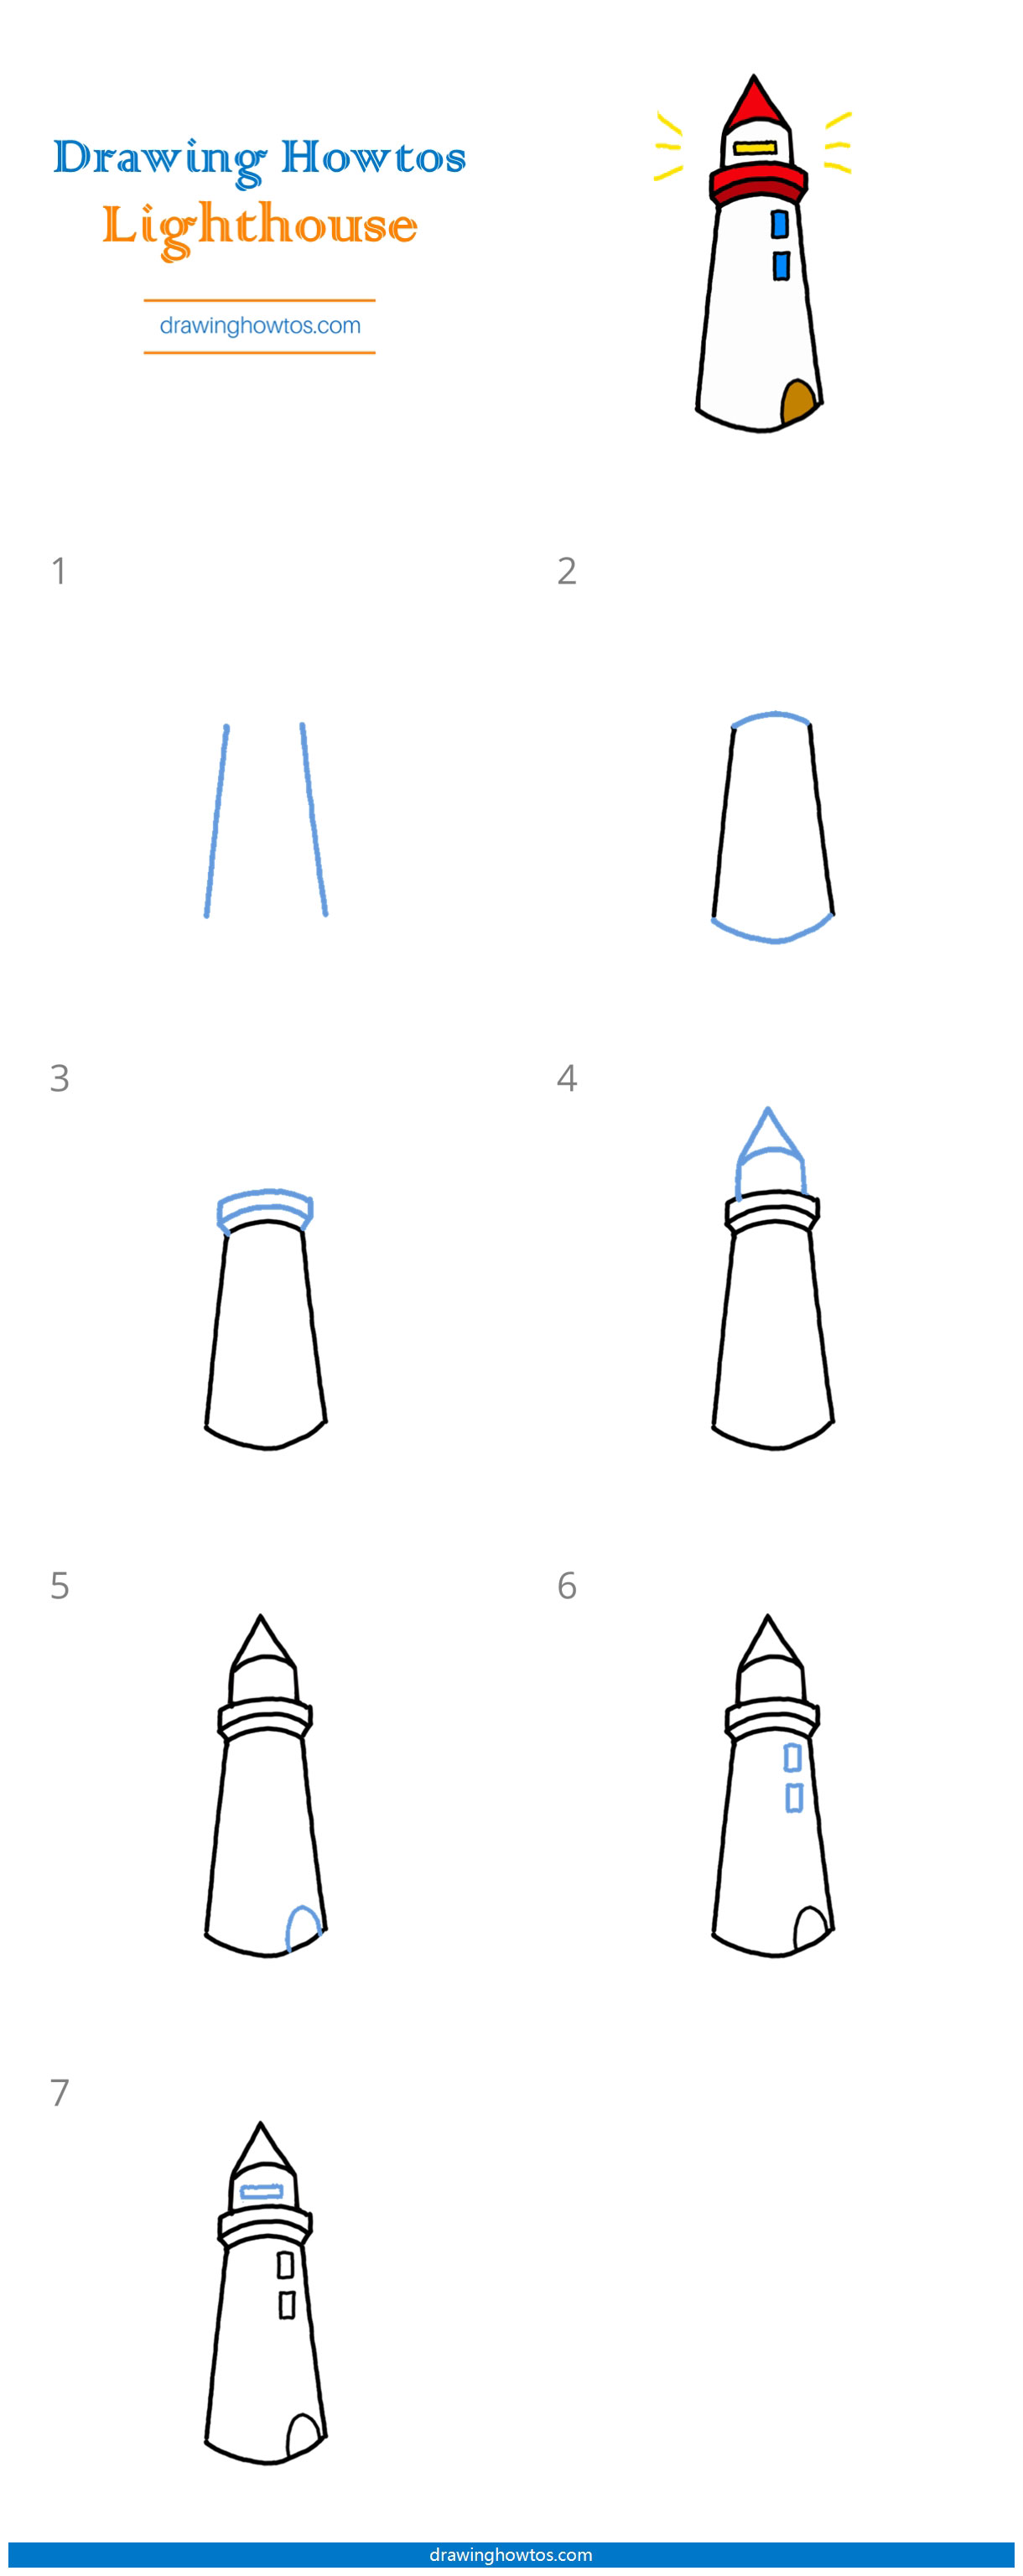 How to Draw a Lighthouse Step by Step